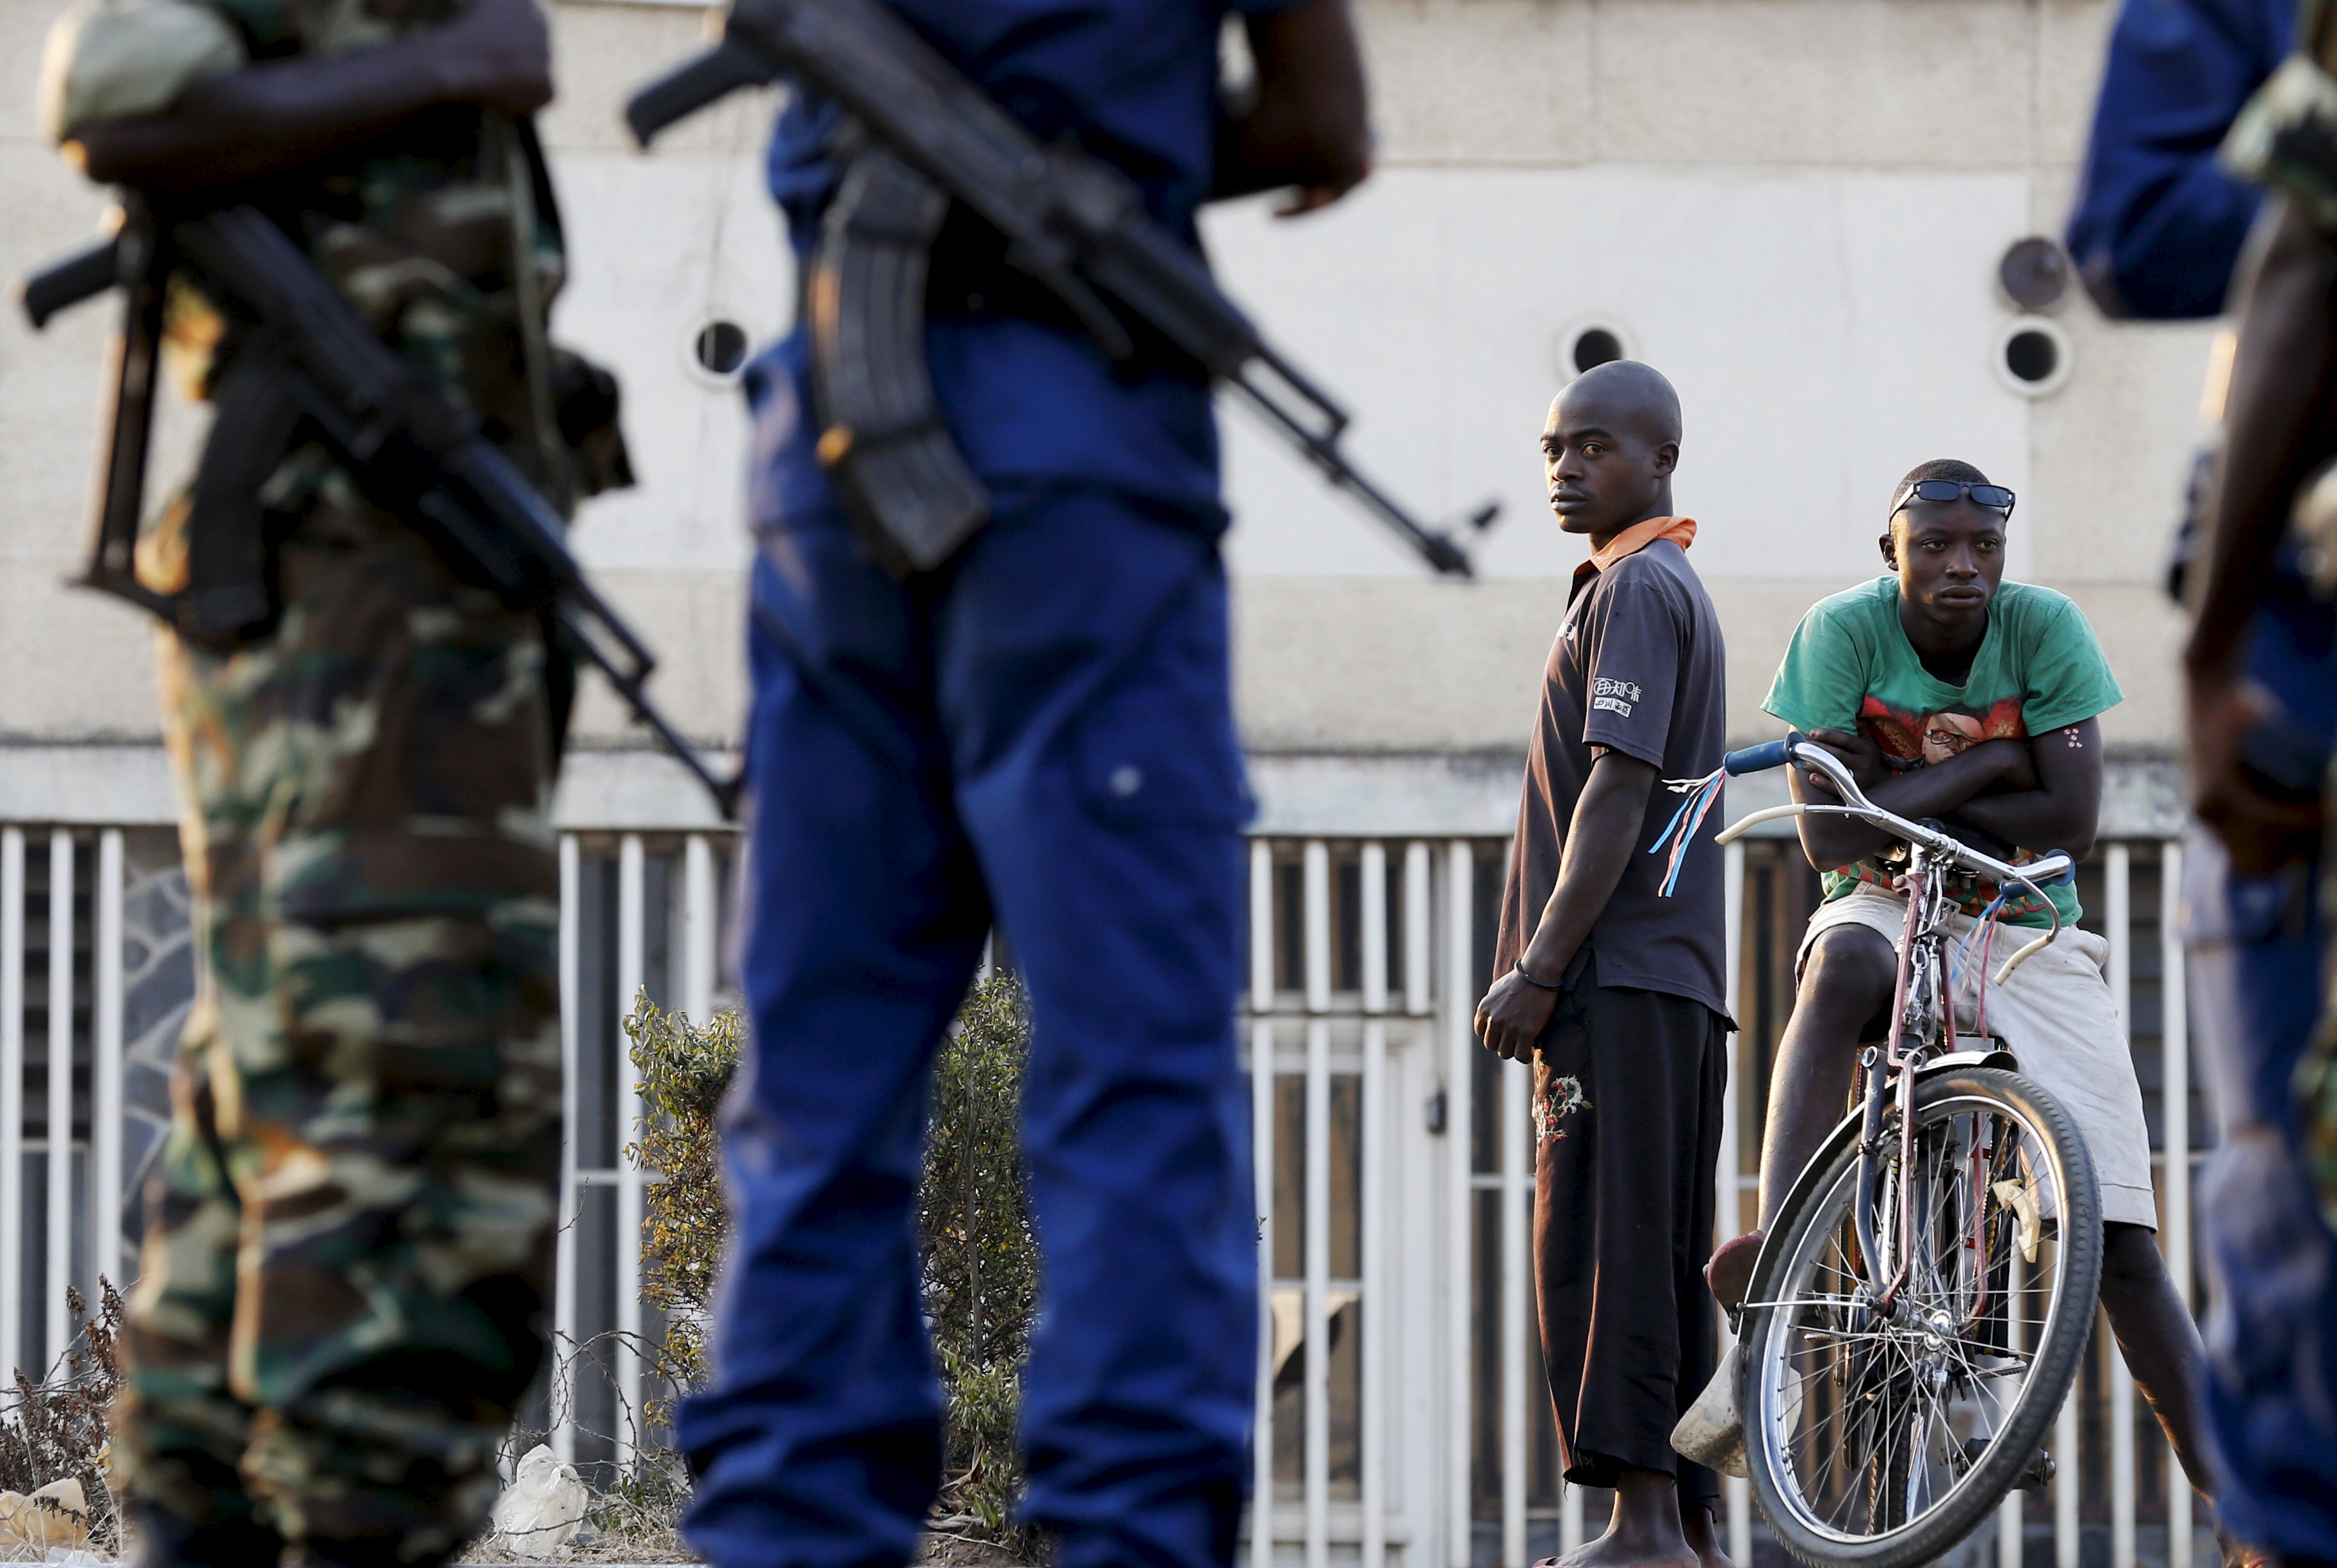 Residents look on as police and soldiers guard a voting station in Burundi's capital Bujumbura during the country's presidential election